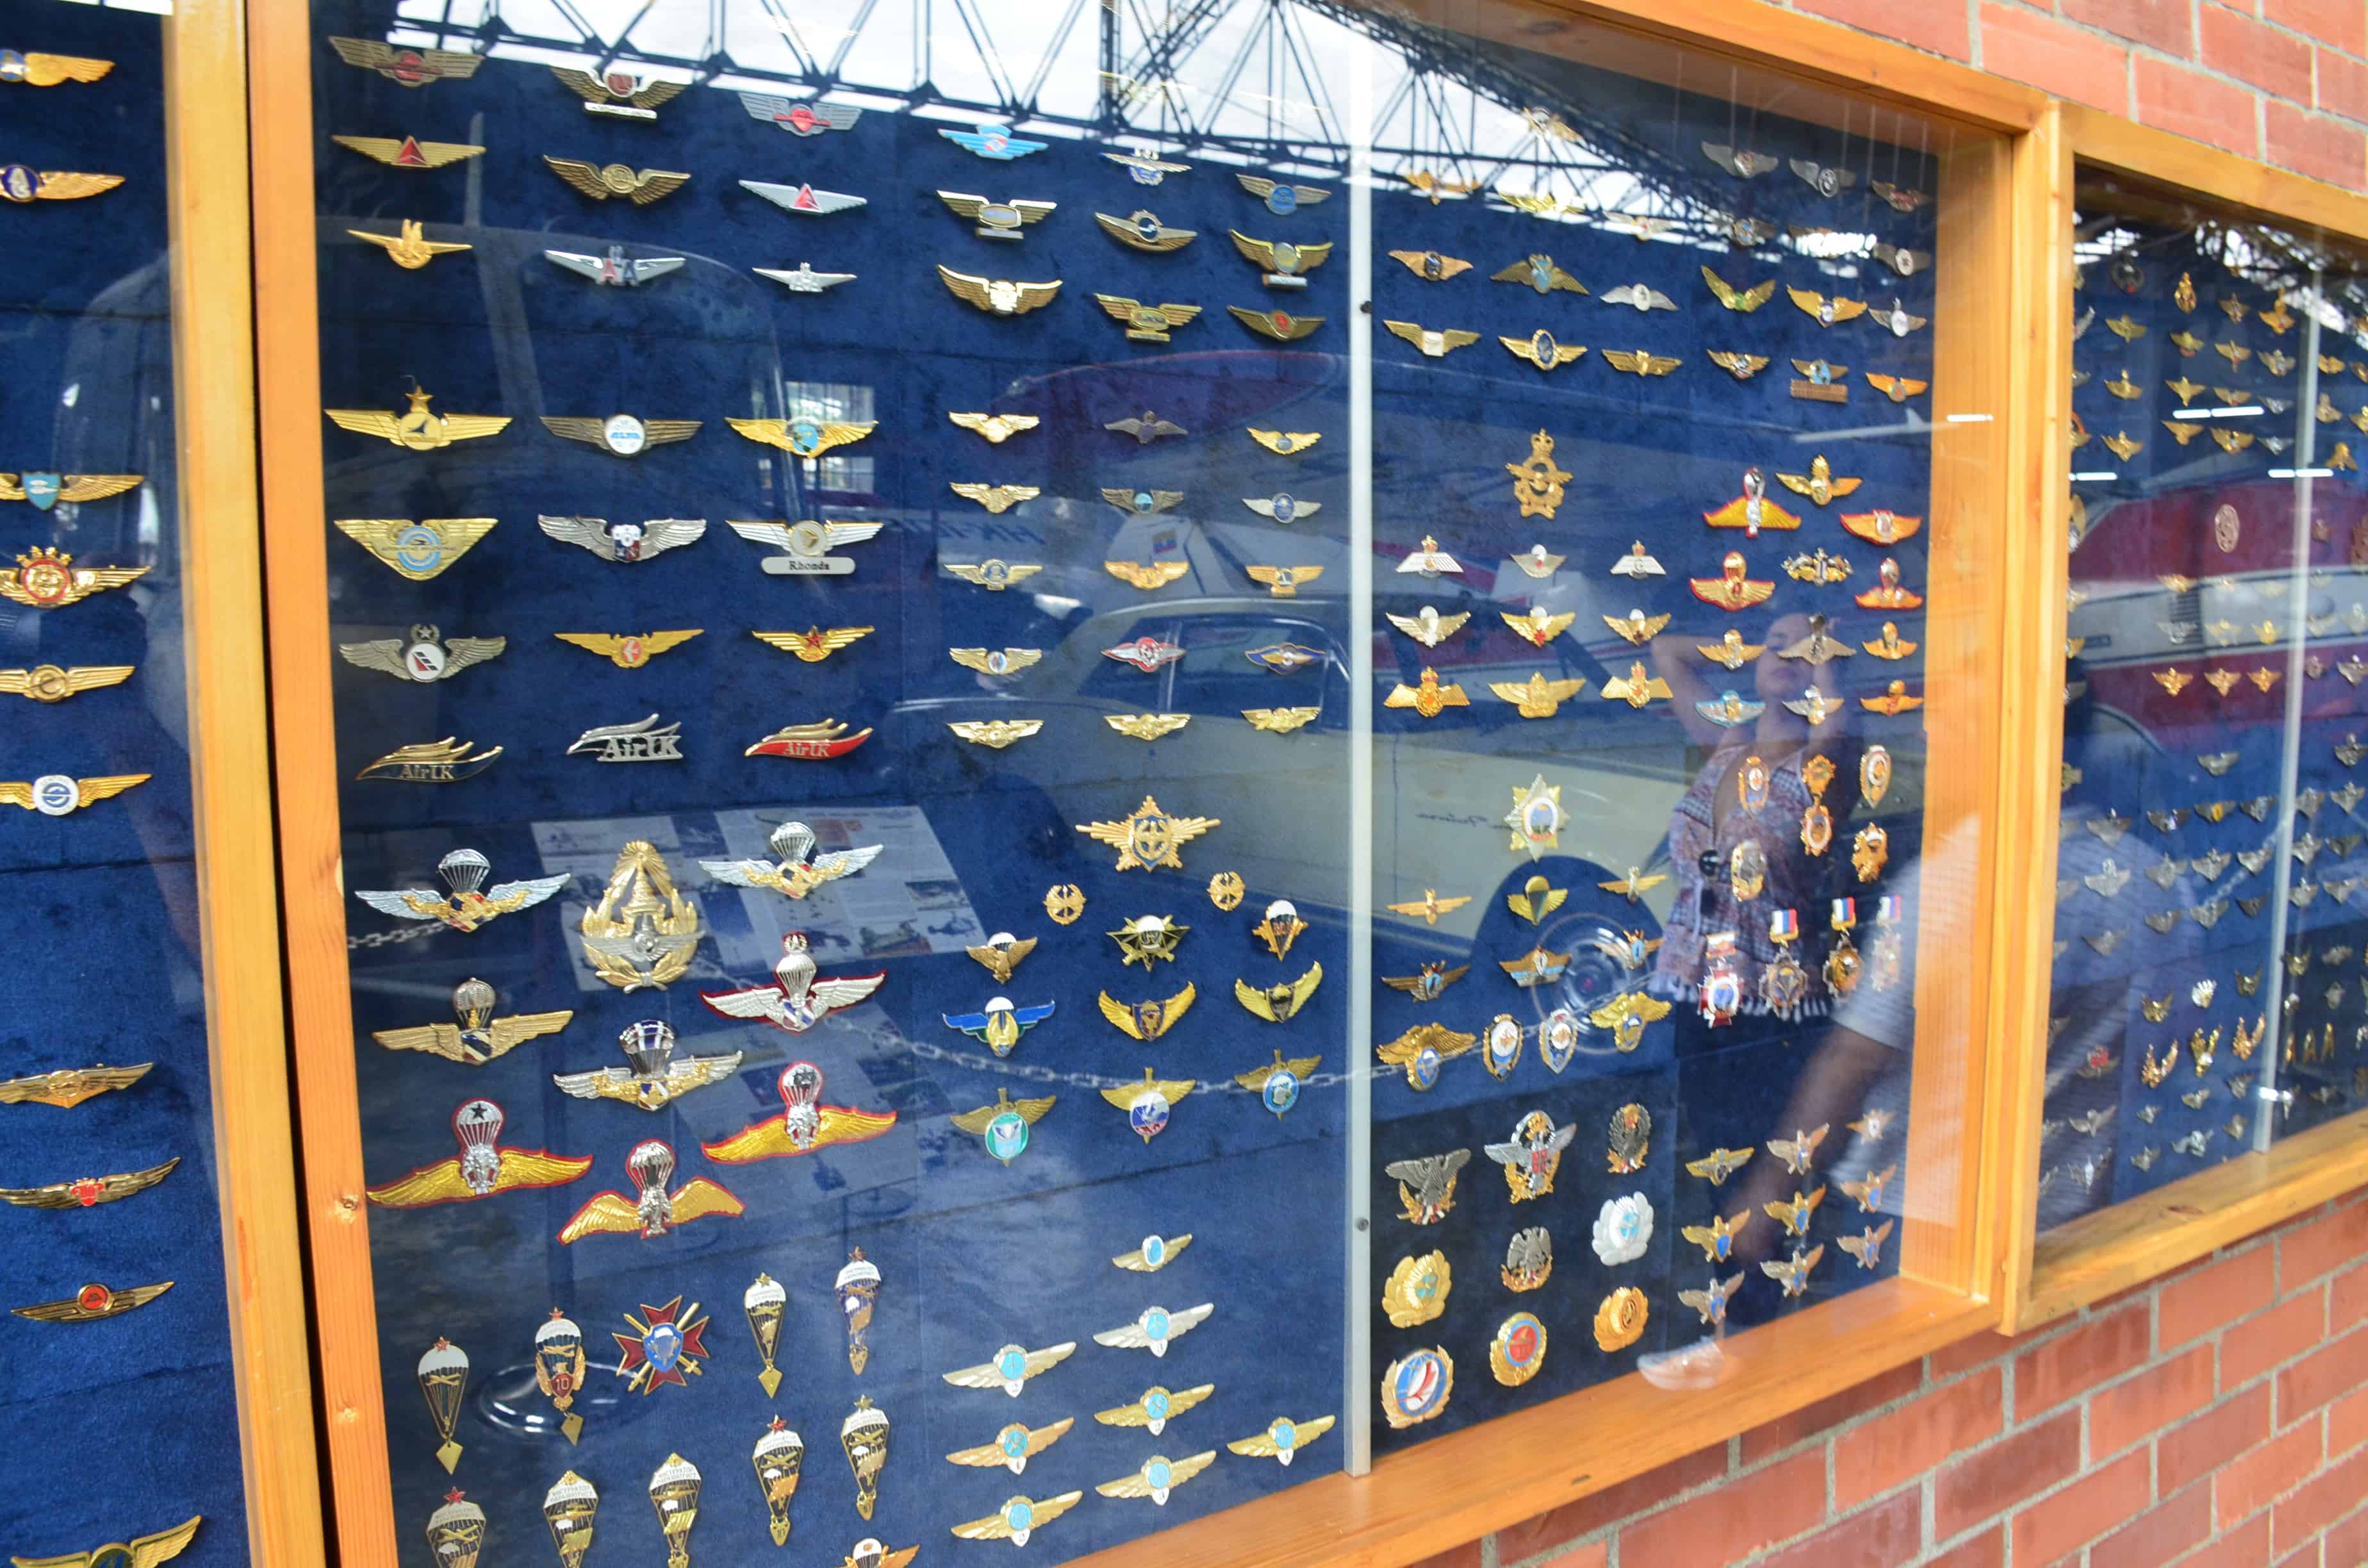 Airline wings at Fénix Air Museum in Palmira, Valle del Cauca, Colombia